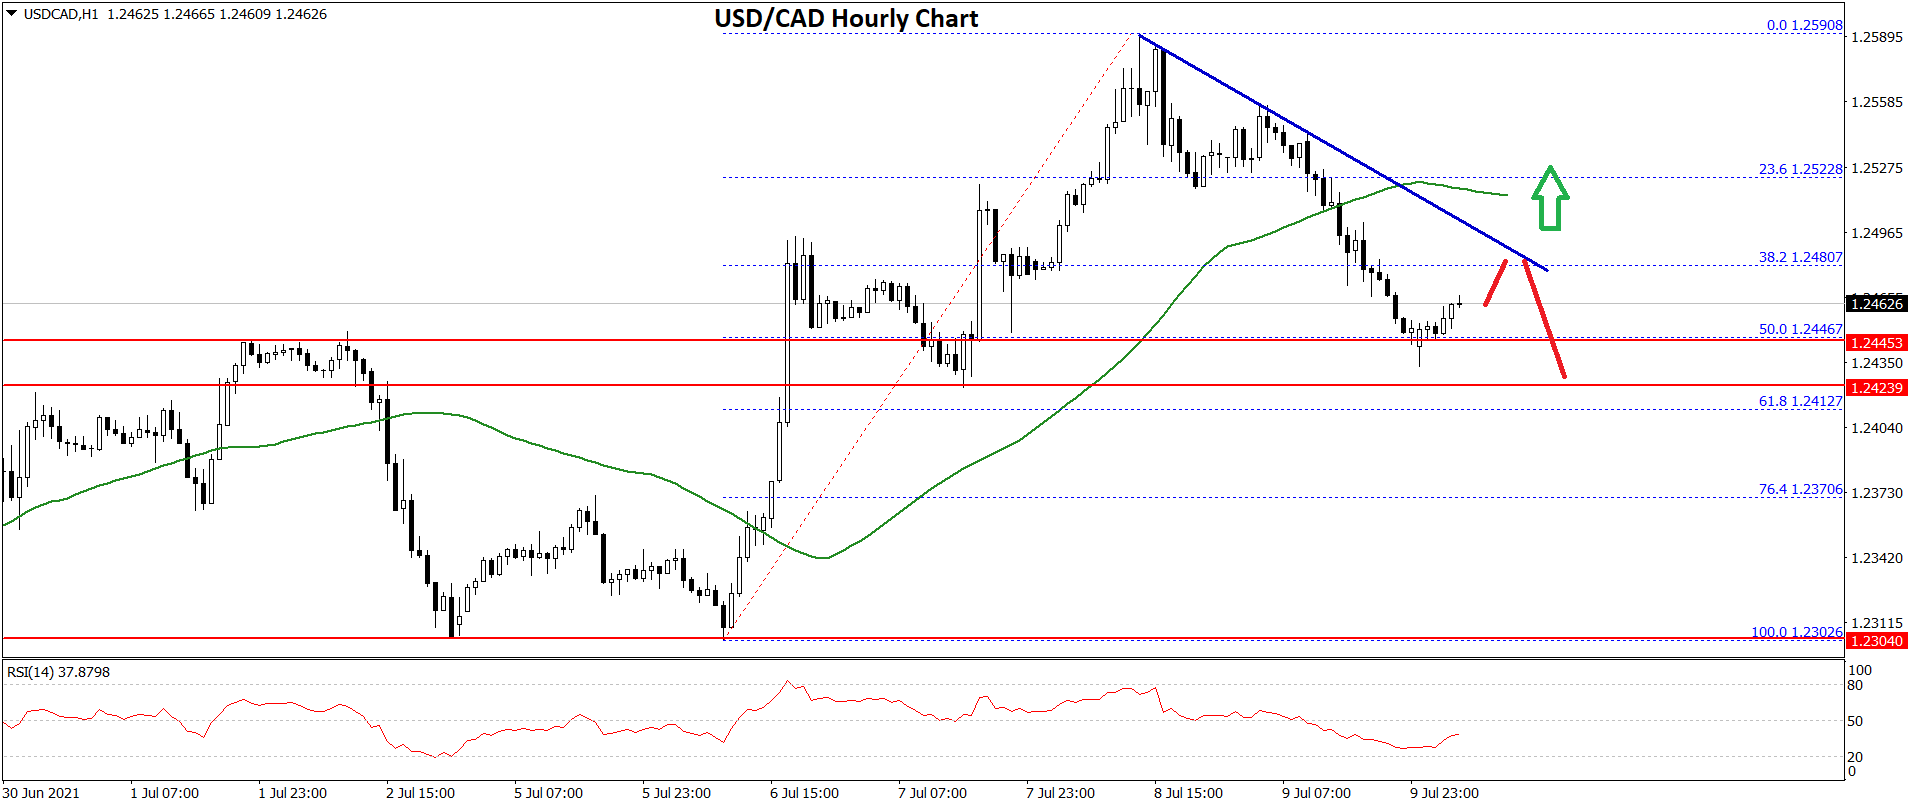 GBP/USD Recovers Ground, USD/CAD is Facing Uphill Task